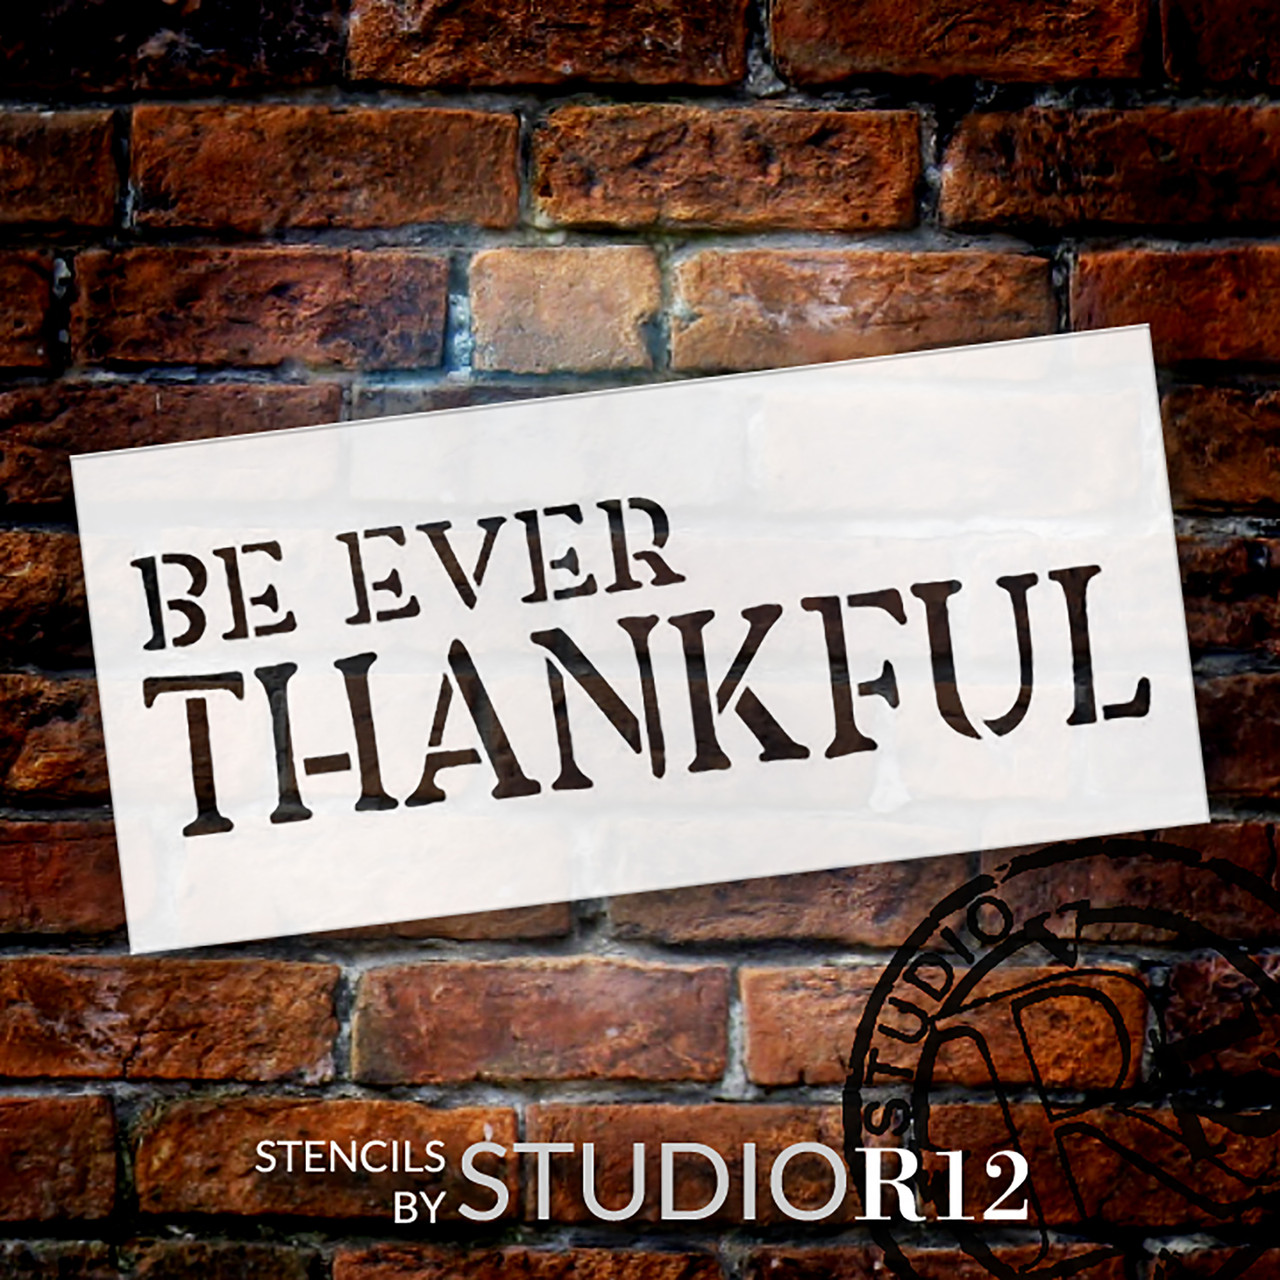 Be Ever Thankful Stencil by StudioR12 | DIY Rustic Fall Farmhouse Home Decor | Thanksgiving Autumn Harvest Word Art | Craft & Paint Wood Signs | Reusable Mylar Template | Select Size